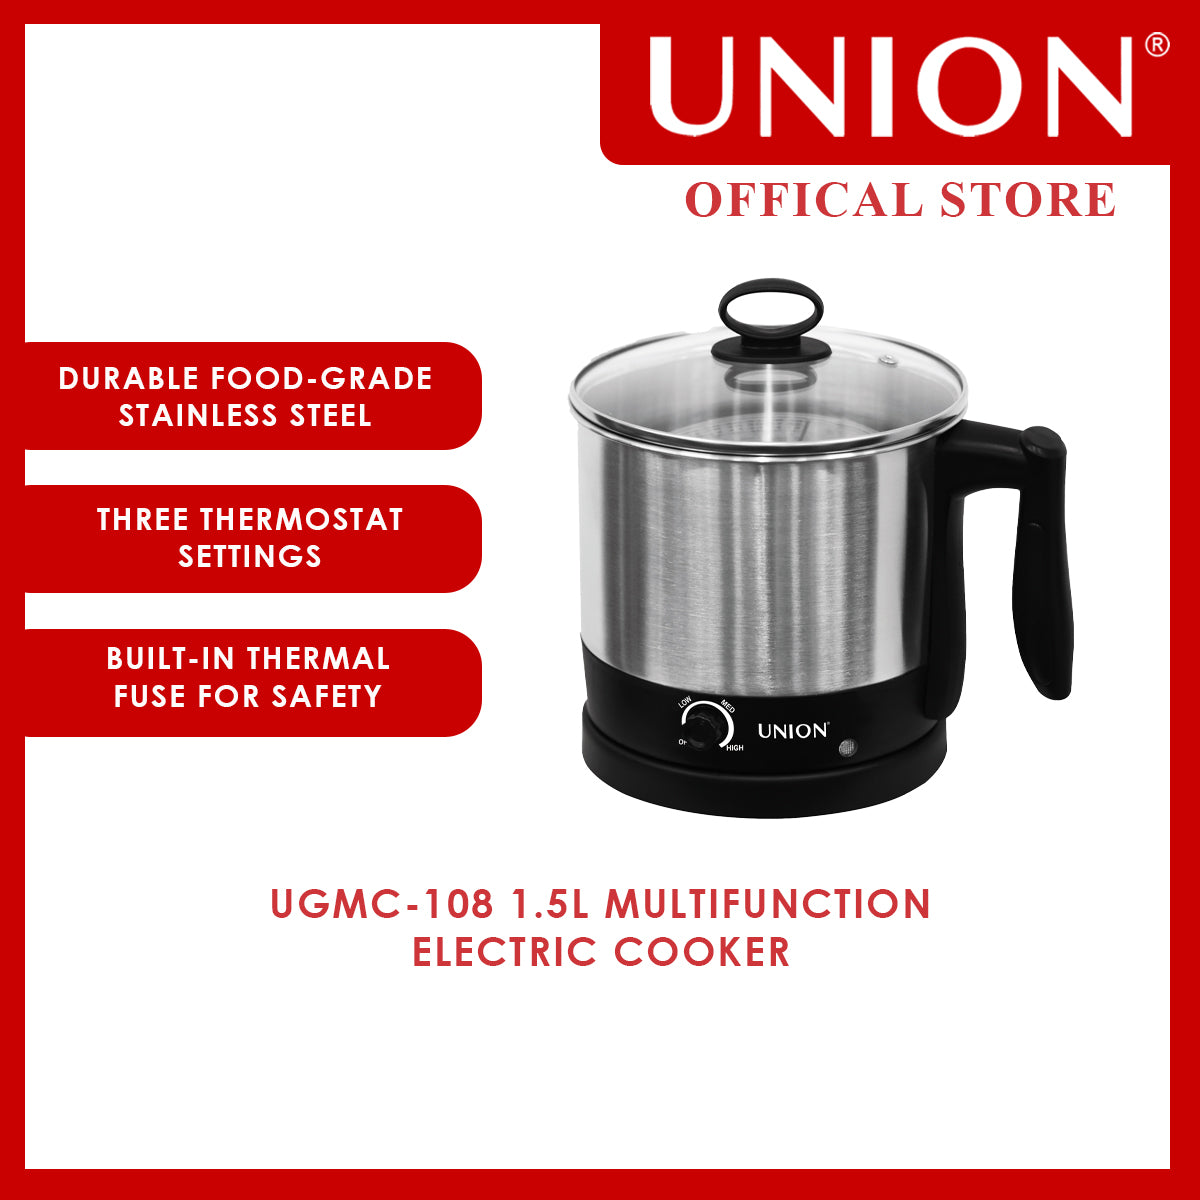 Union® 1.5L Multi-Function Electric Cooker